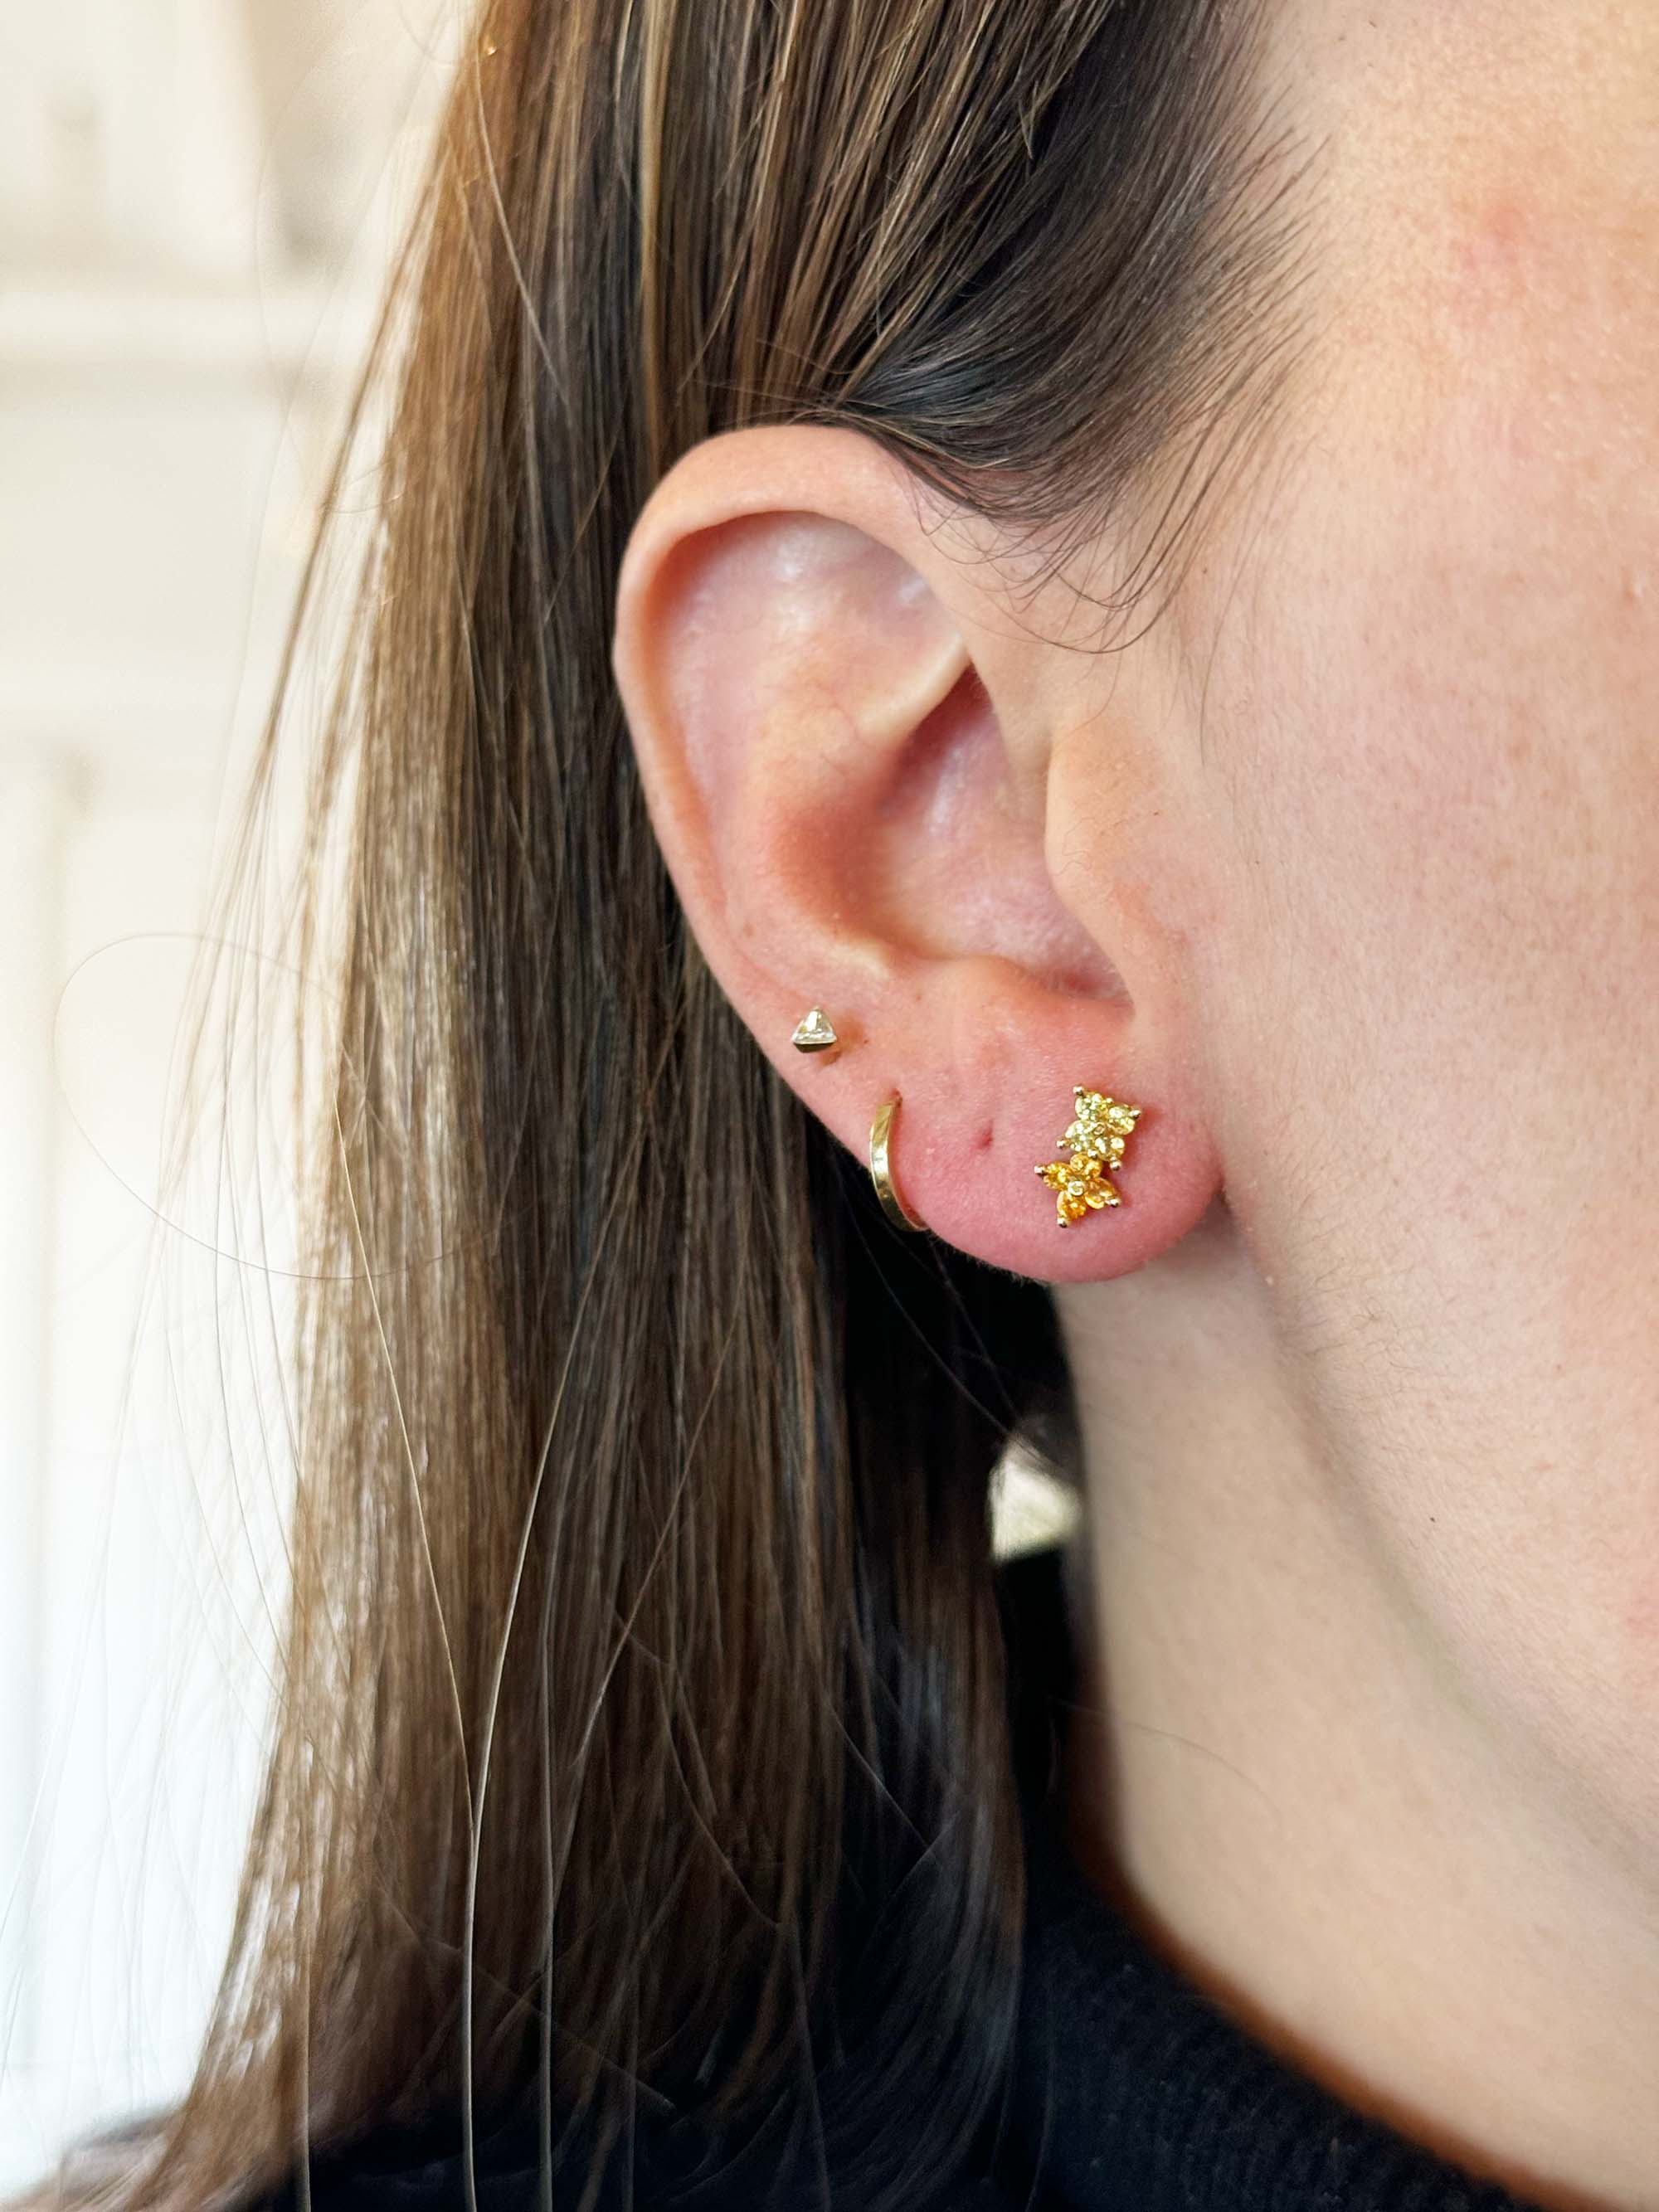 Two O'Clover Studs - Sunny